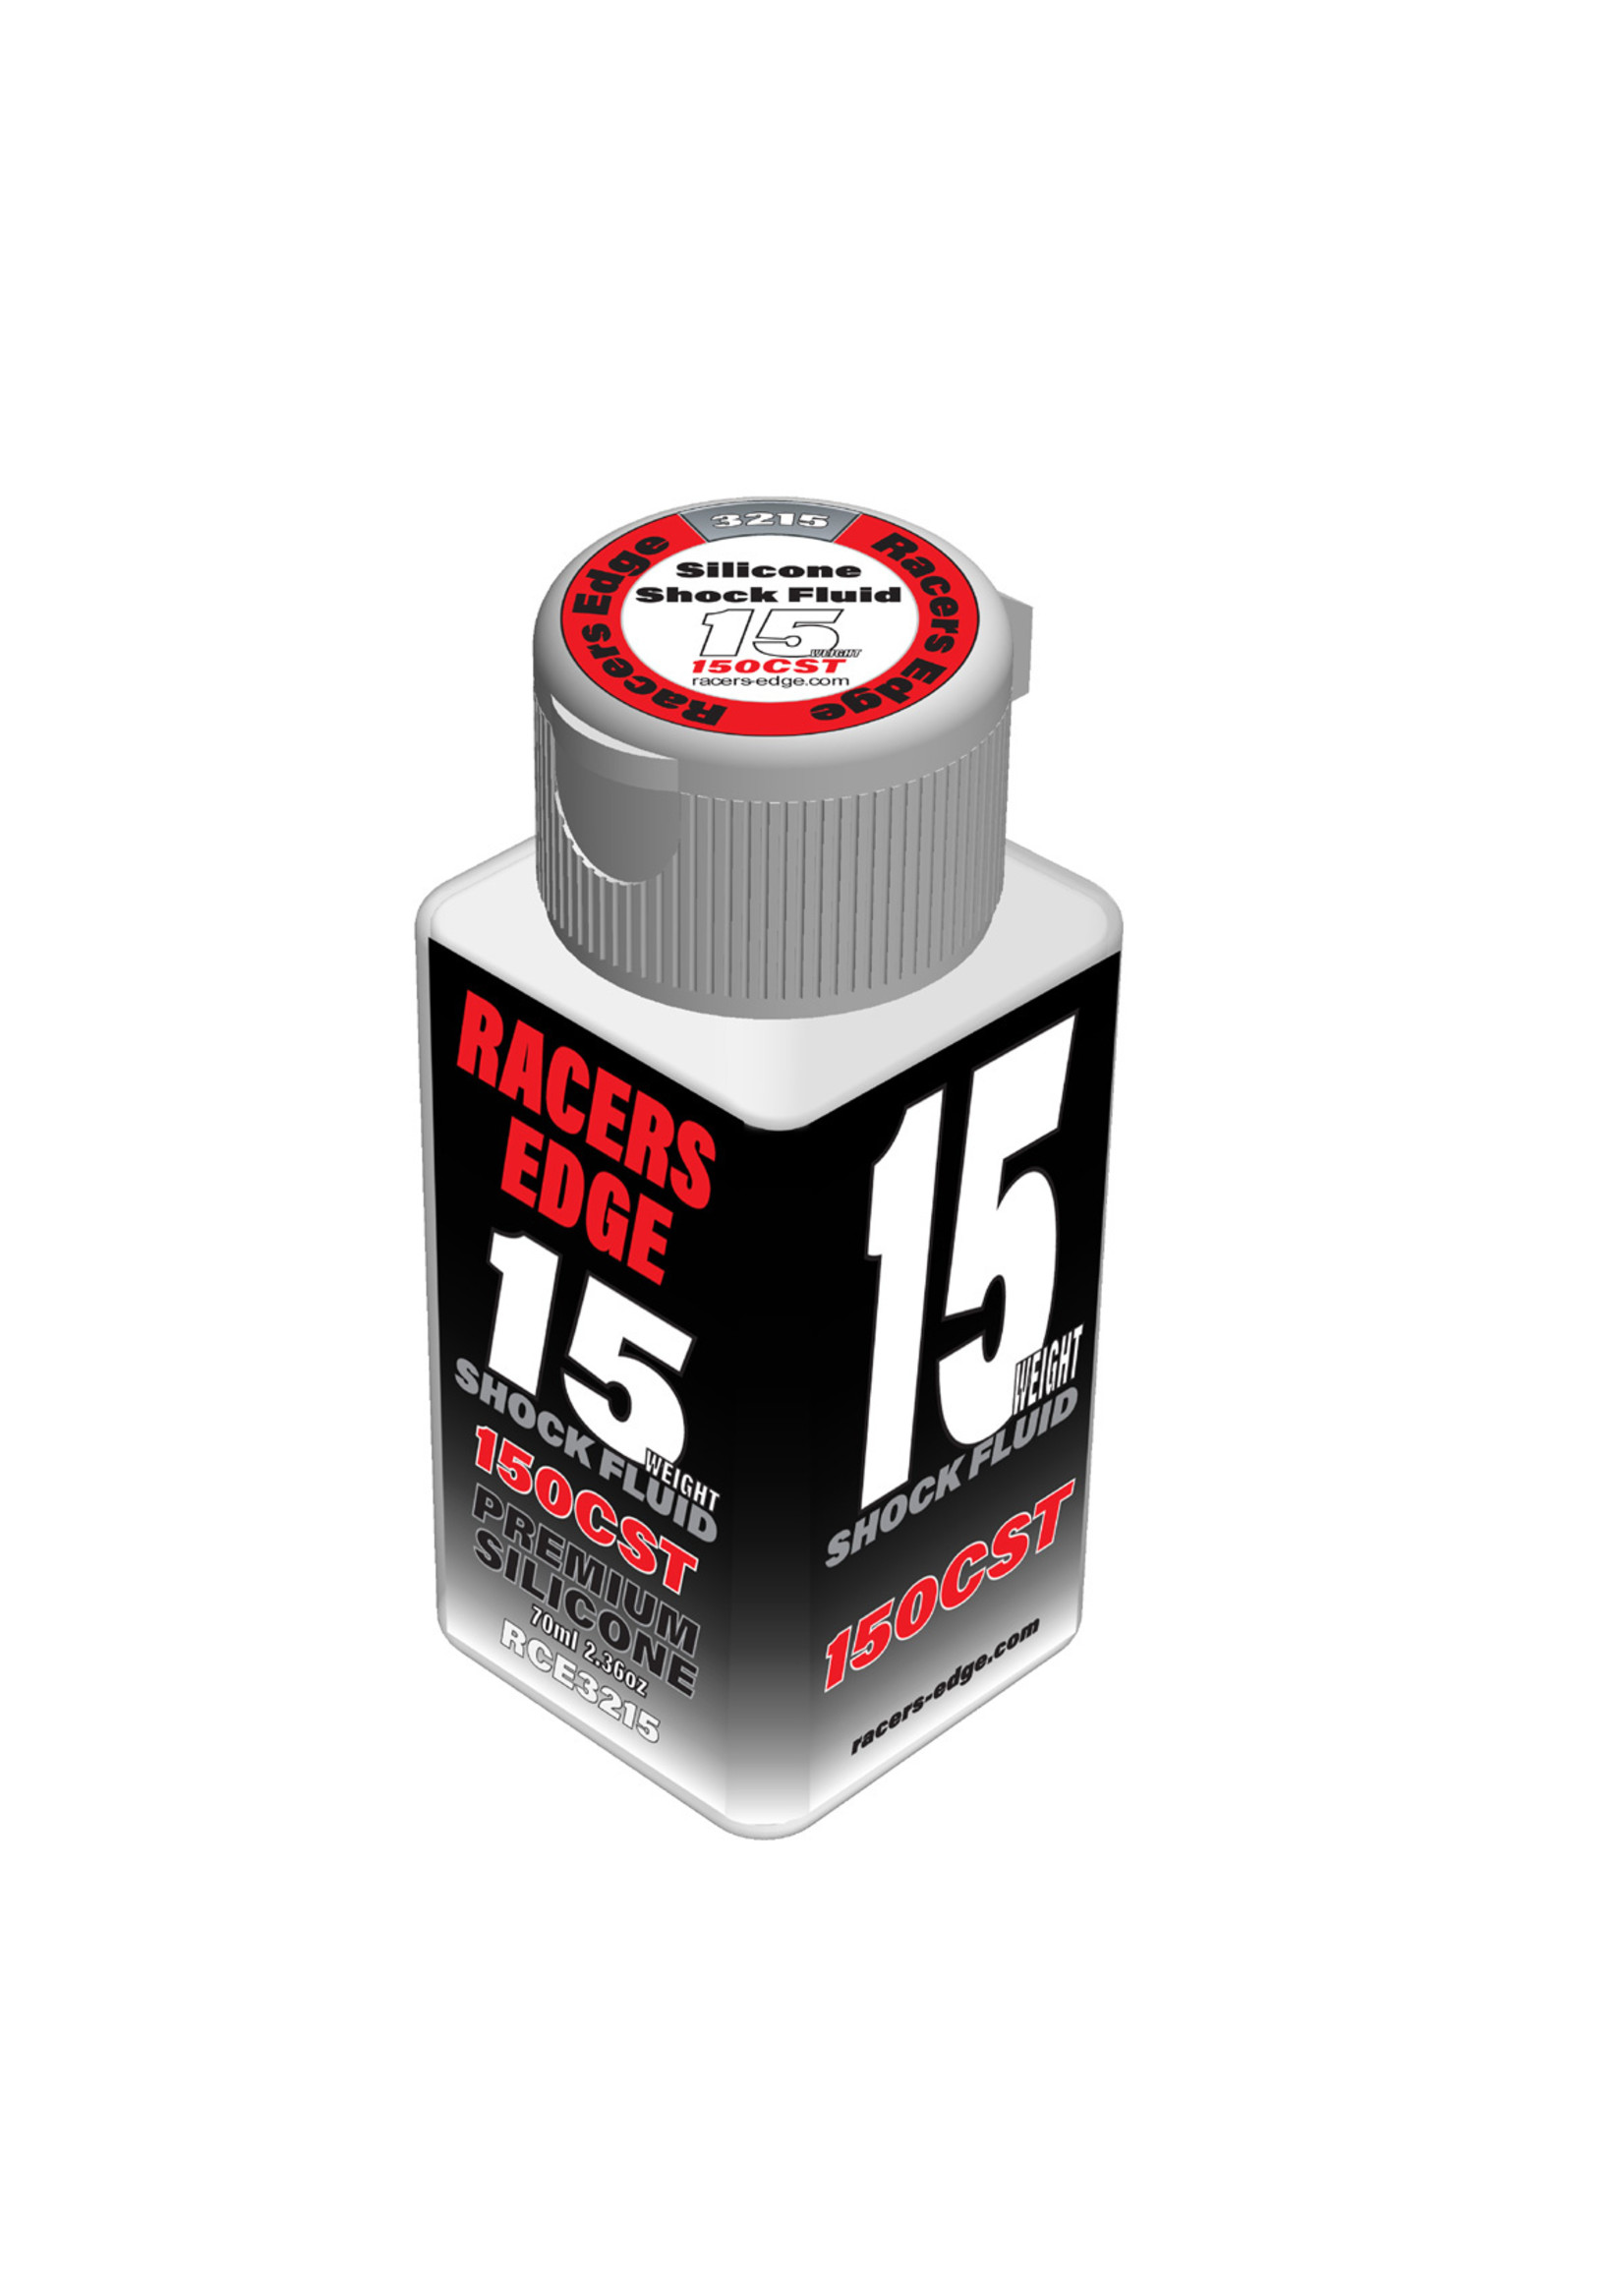 Racers Edge RCE3215 - 15 Weight, 150cSt, 70ml 2.36oz Pure Silicone Shock Oil